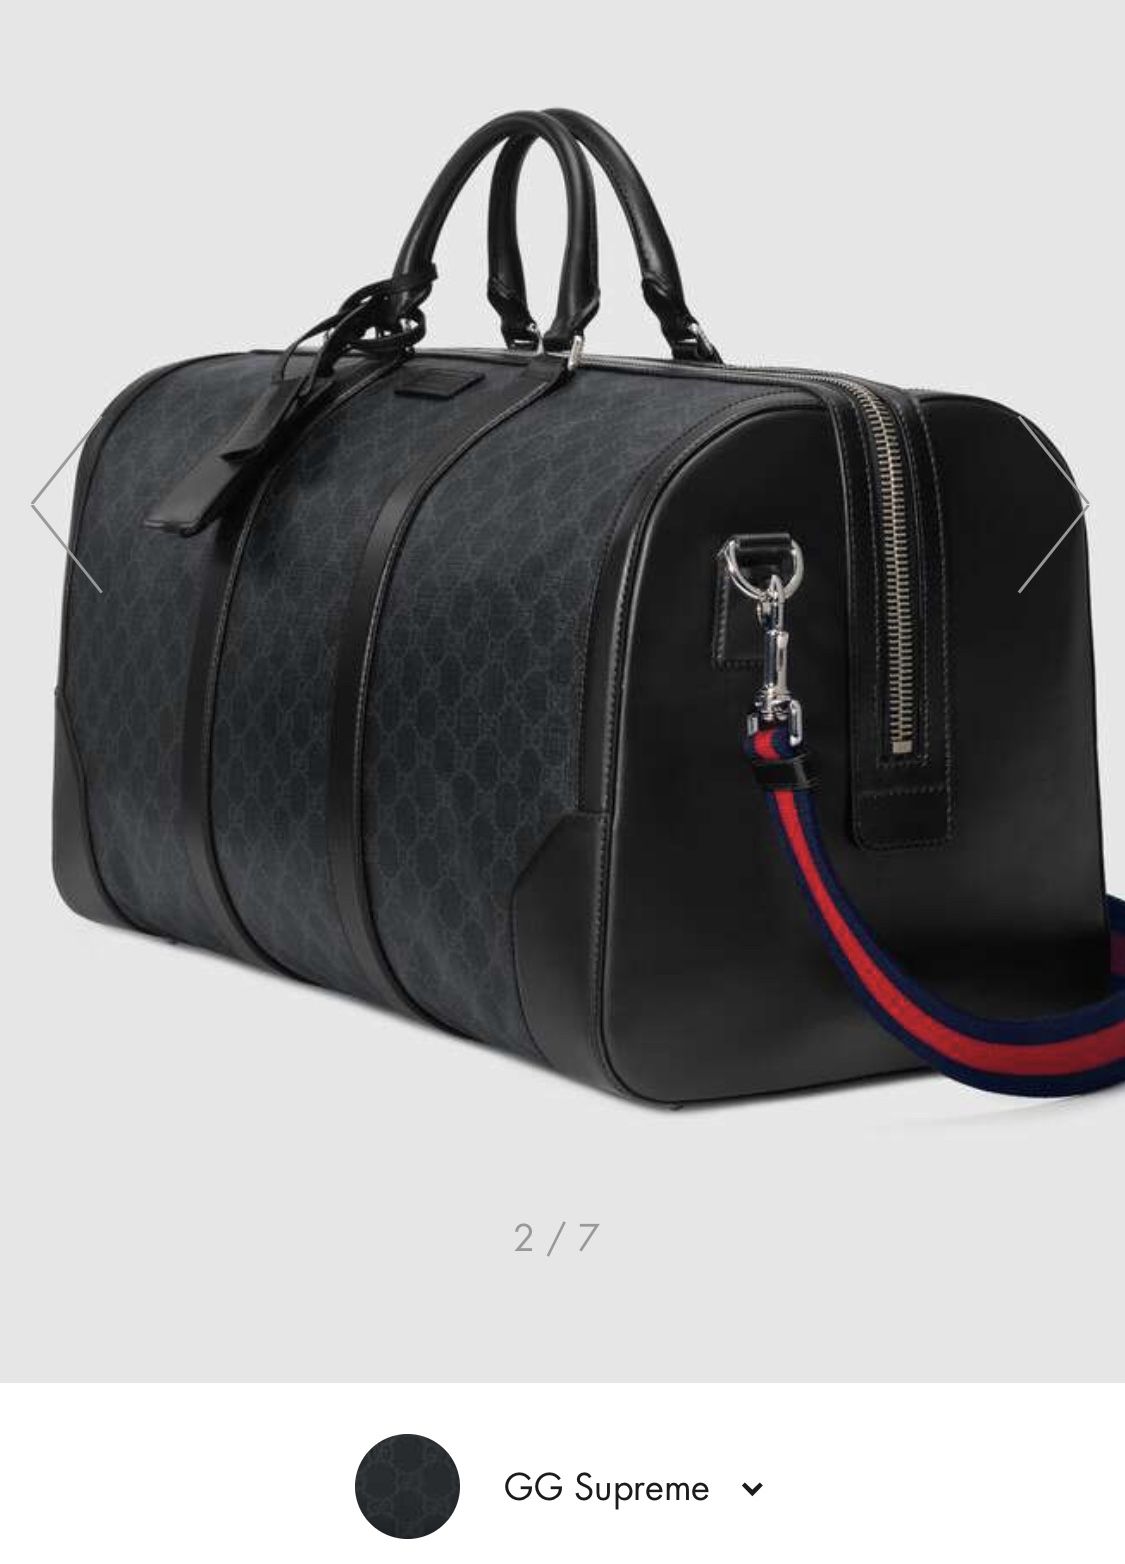 Gucci GG Black Large carry-on duffle Bag MSRP 1950.00 100% Authentic